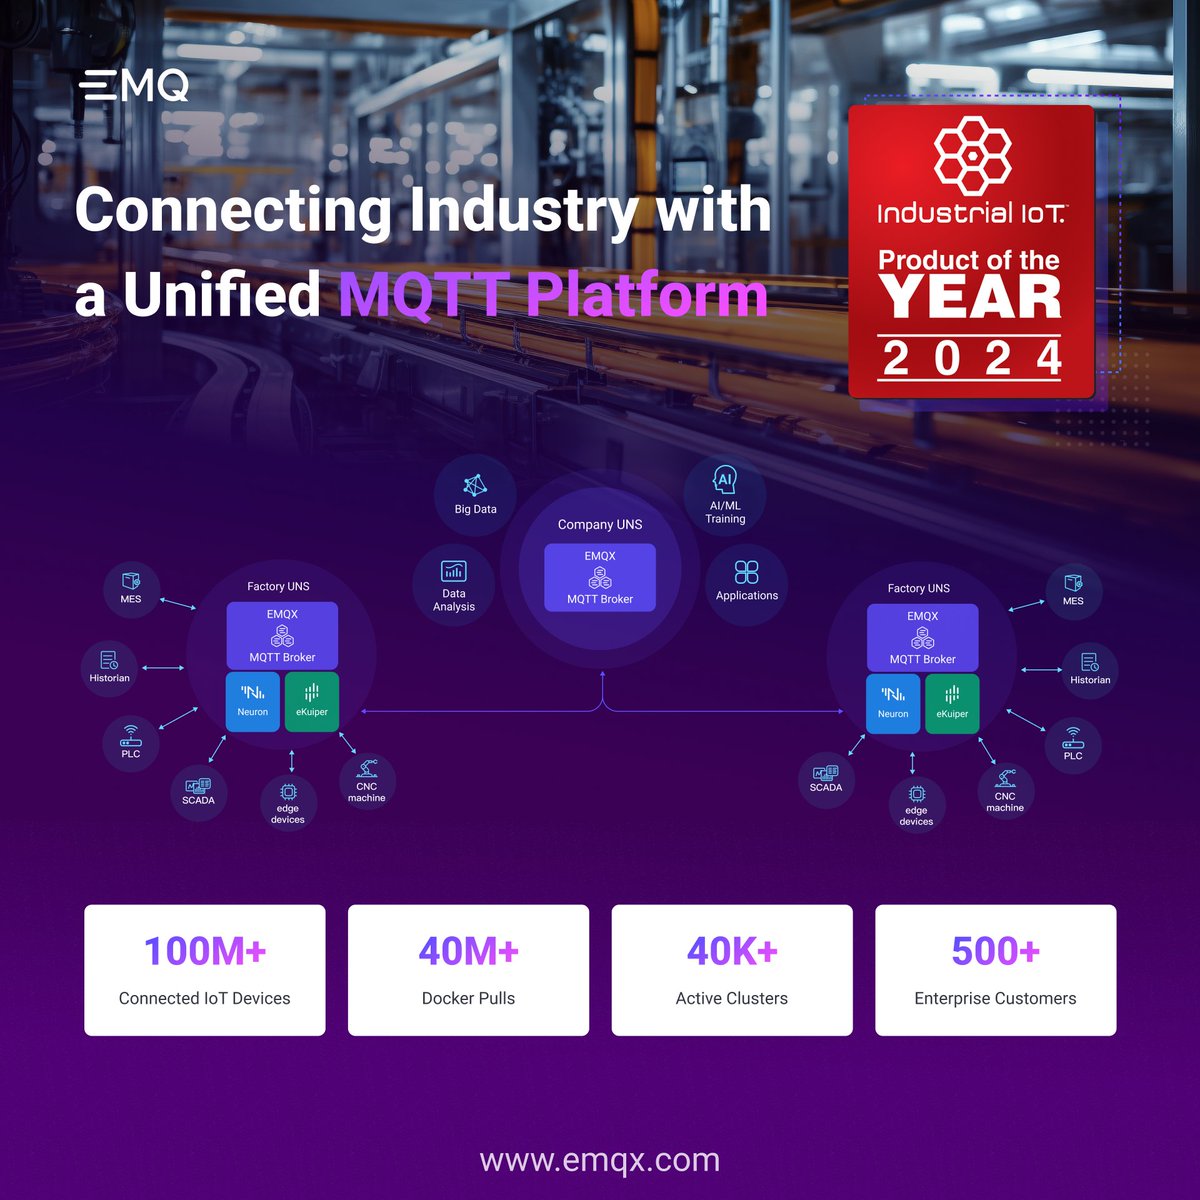 🎉 We're honored to be a recipient of the 2024 IoT Evolution Industrial IoT Product of the Year Award for our EMQX Platform! 🏆 #IoTEvolutionWorld #IndustrialIoT #MQTT #IoT @tmcnet Check out the full list of winners here ⬇️ social.emqx.com/u/Sp2DVh